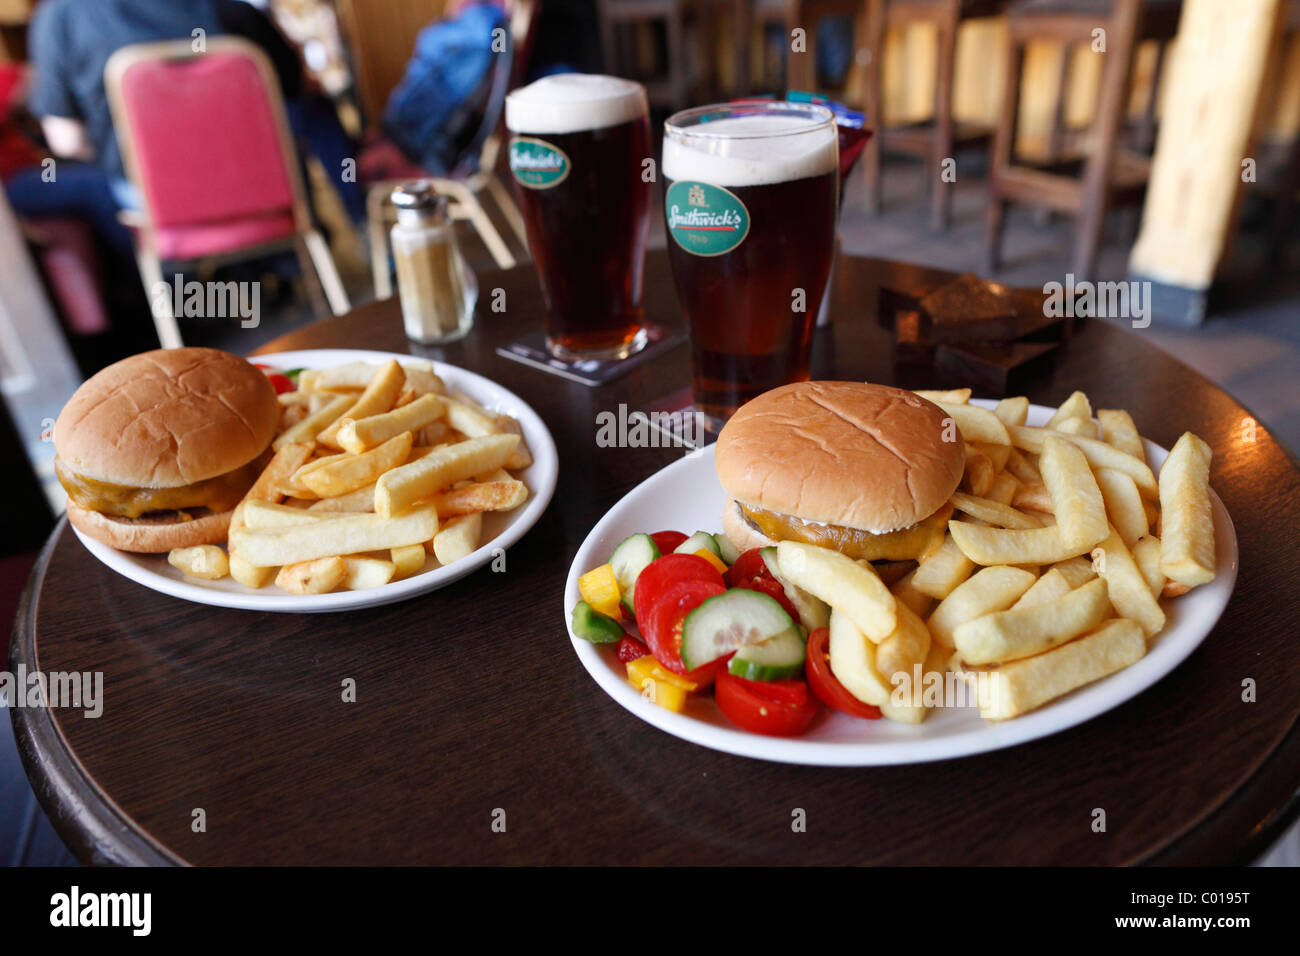 Burger with fries and Smithwick's beer in a pub in Shannonbridge, County Offaly, Leinster, Republic of Ireland, Europe Stock Photo